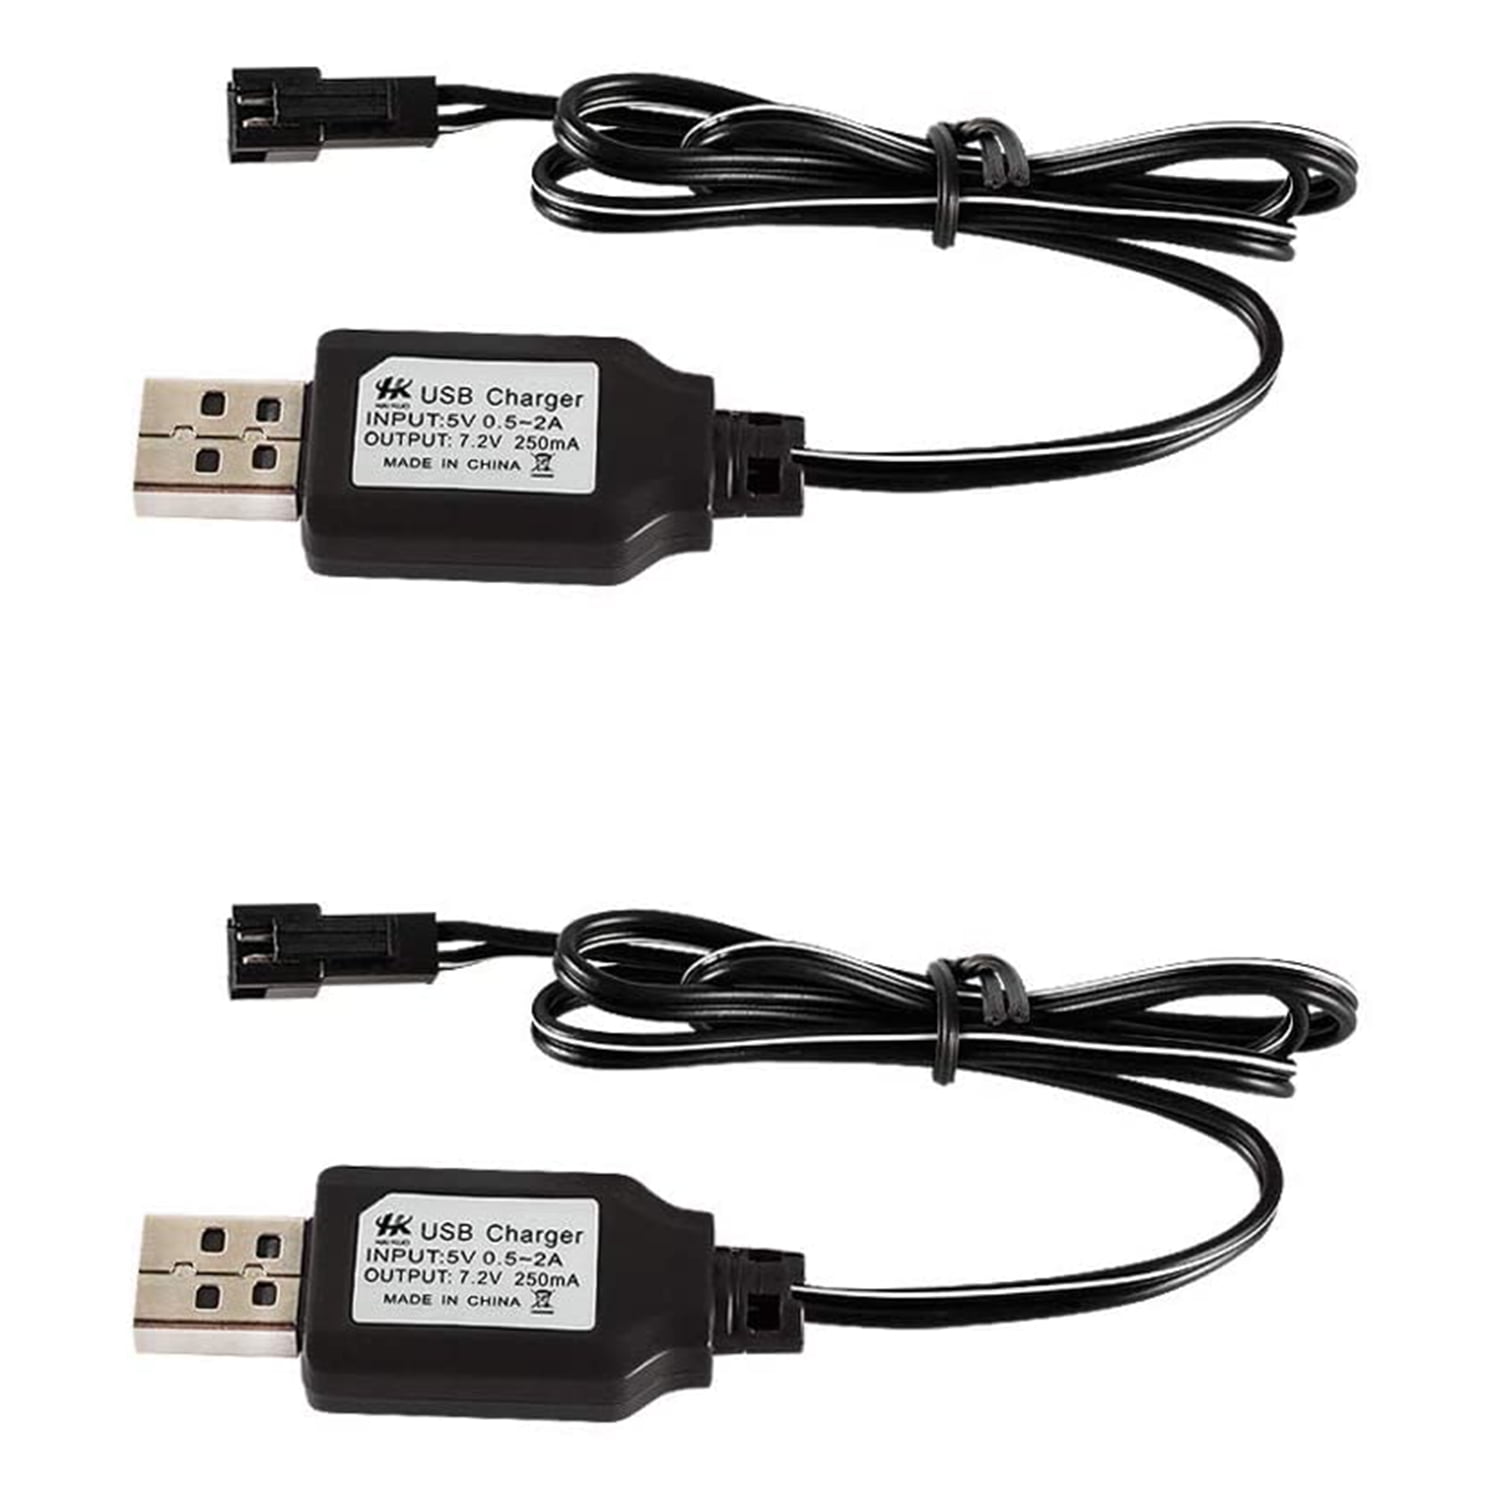 7.2V sm-2p Connector USB Powered Charger 